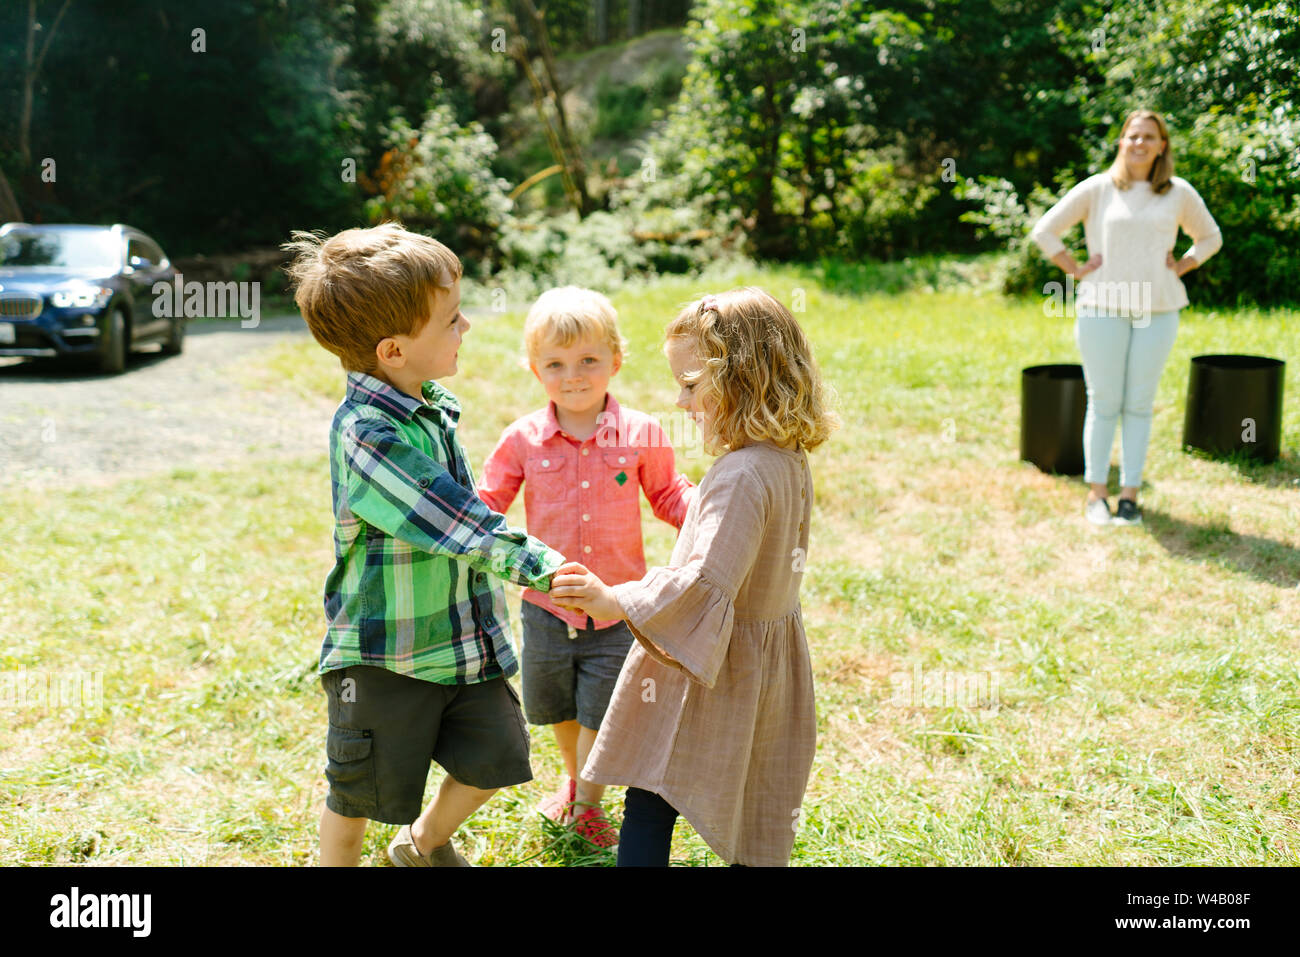 Portrait of three children holding hands and playing together Stock Photo